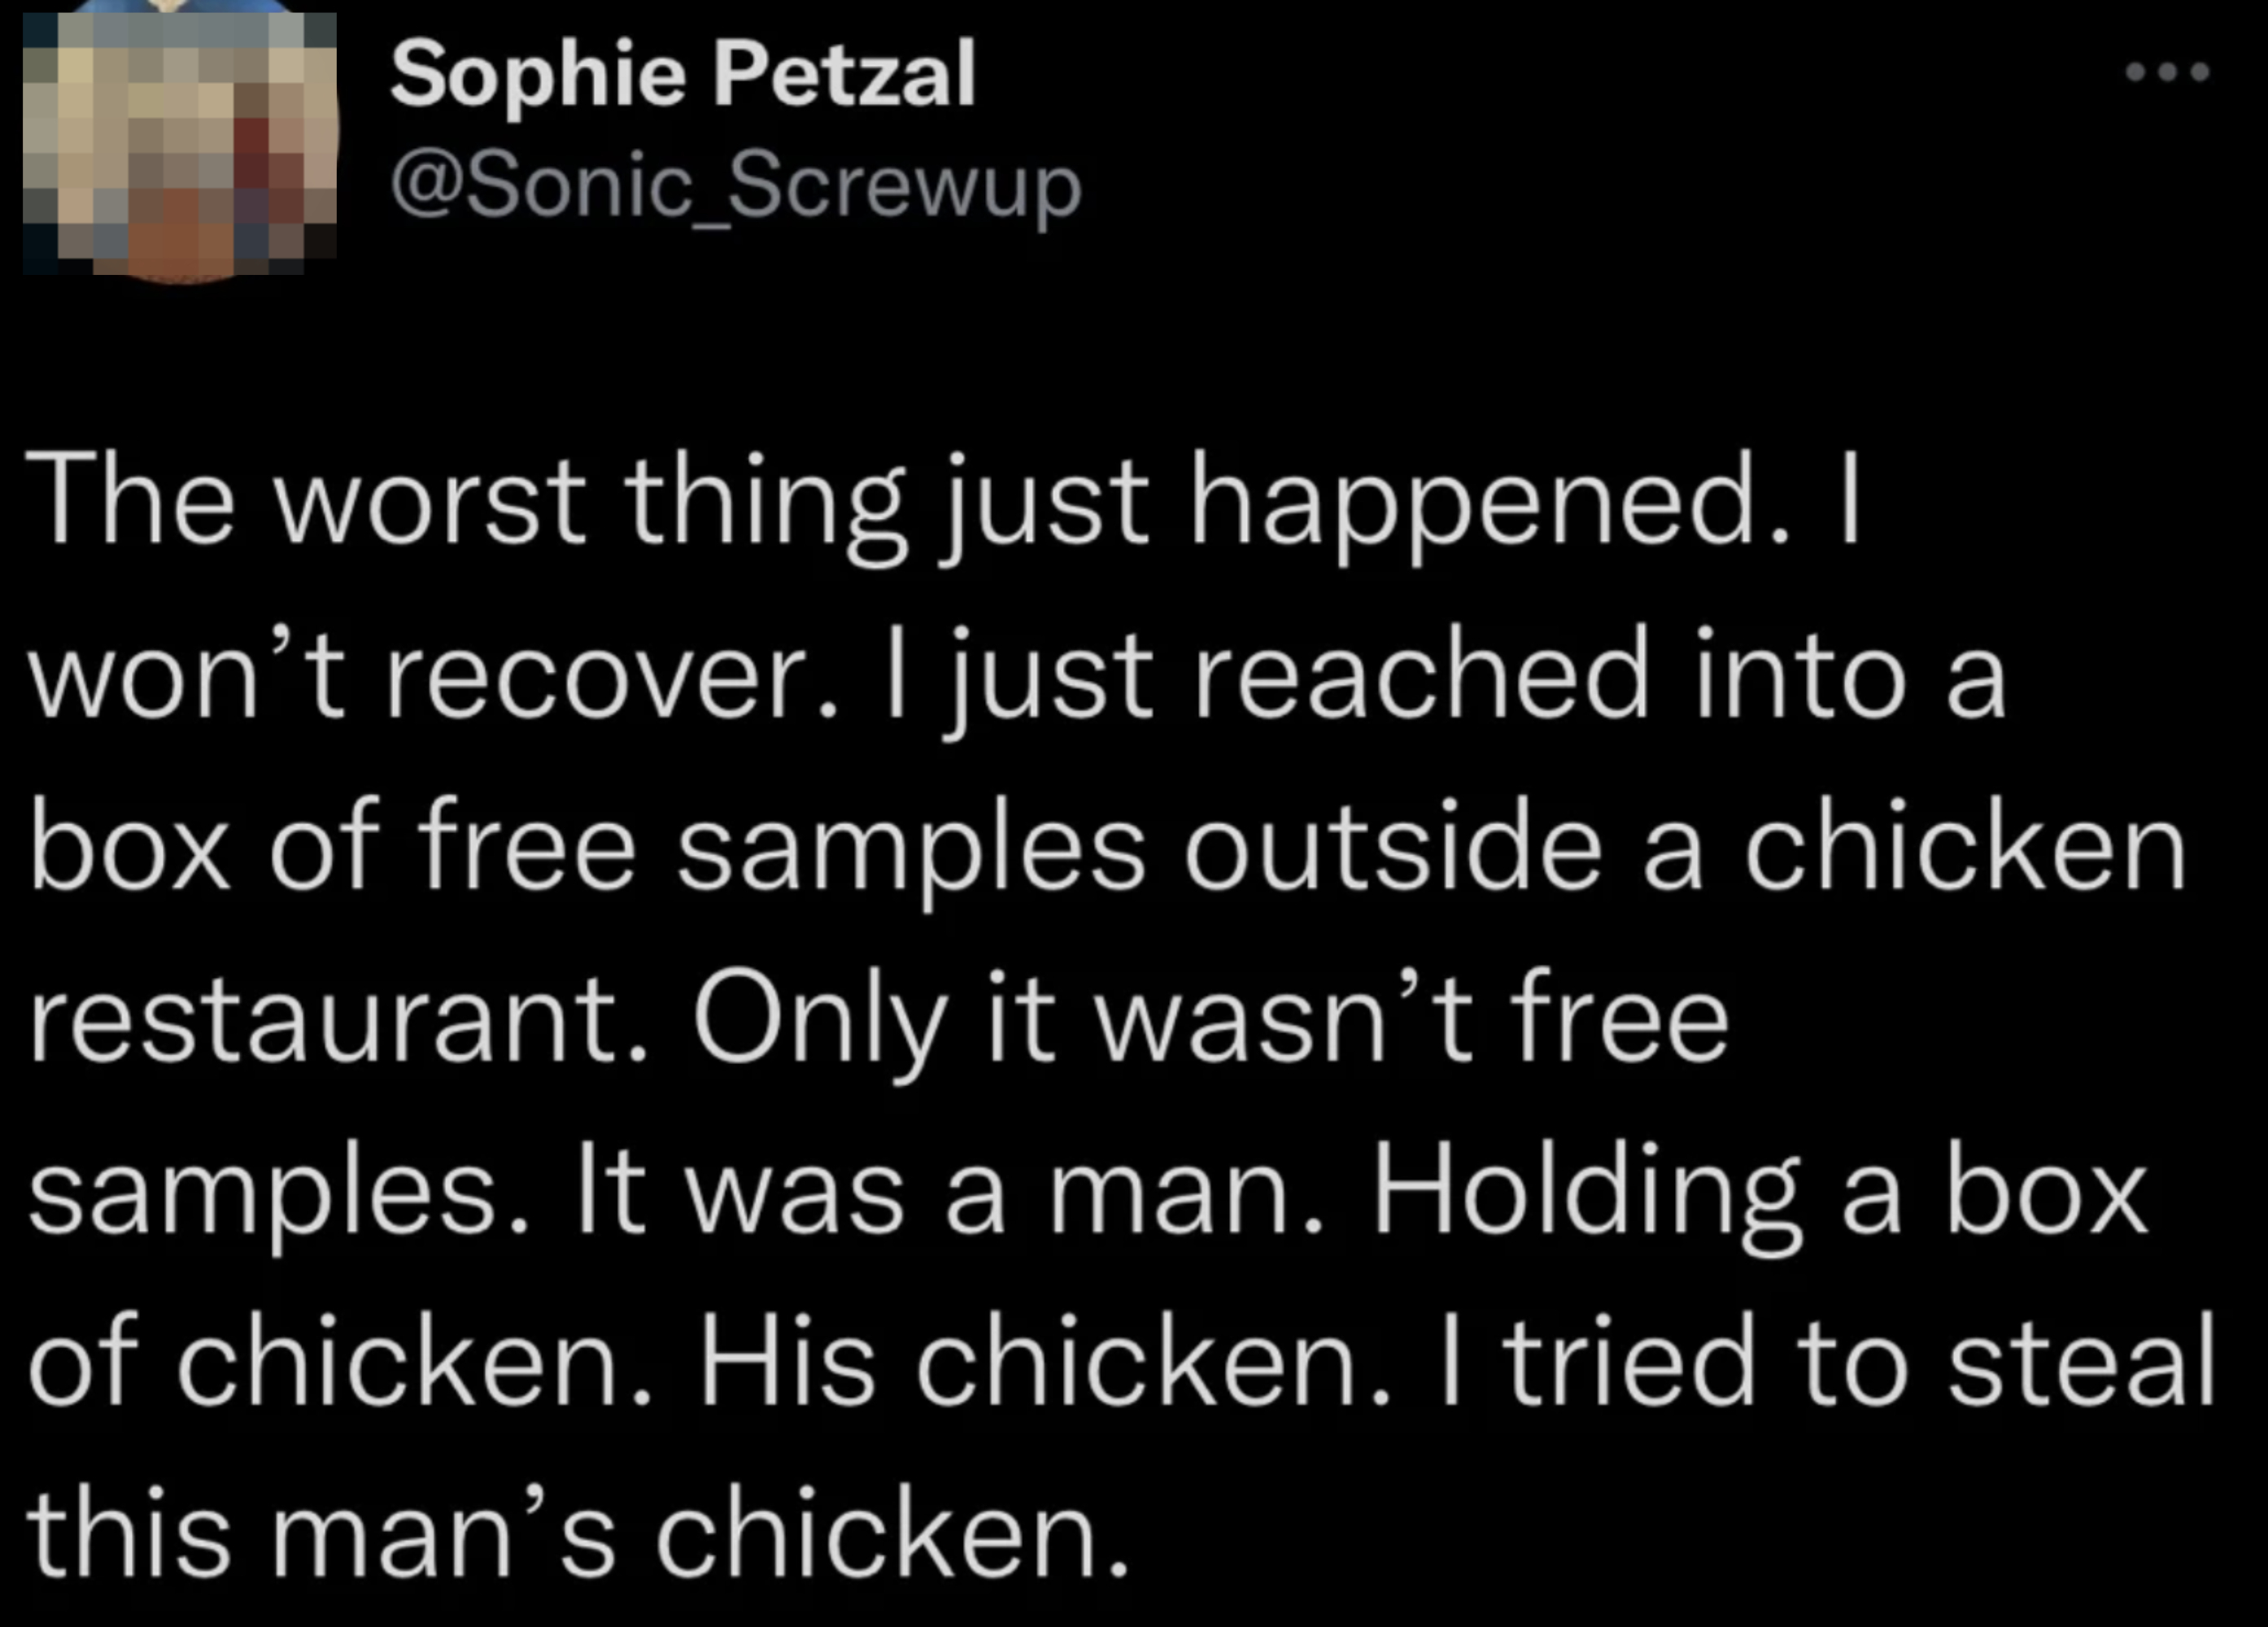 Text post describing a humorous mistake where the user thought a box held by a man was free chicken samples